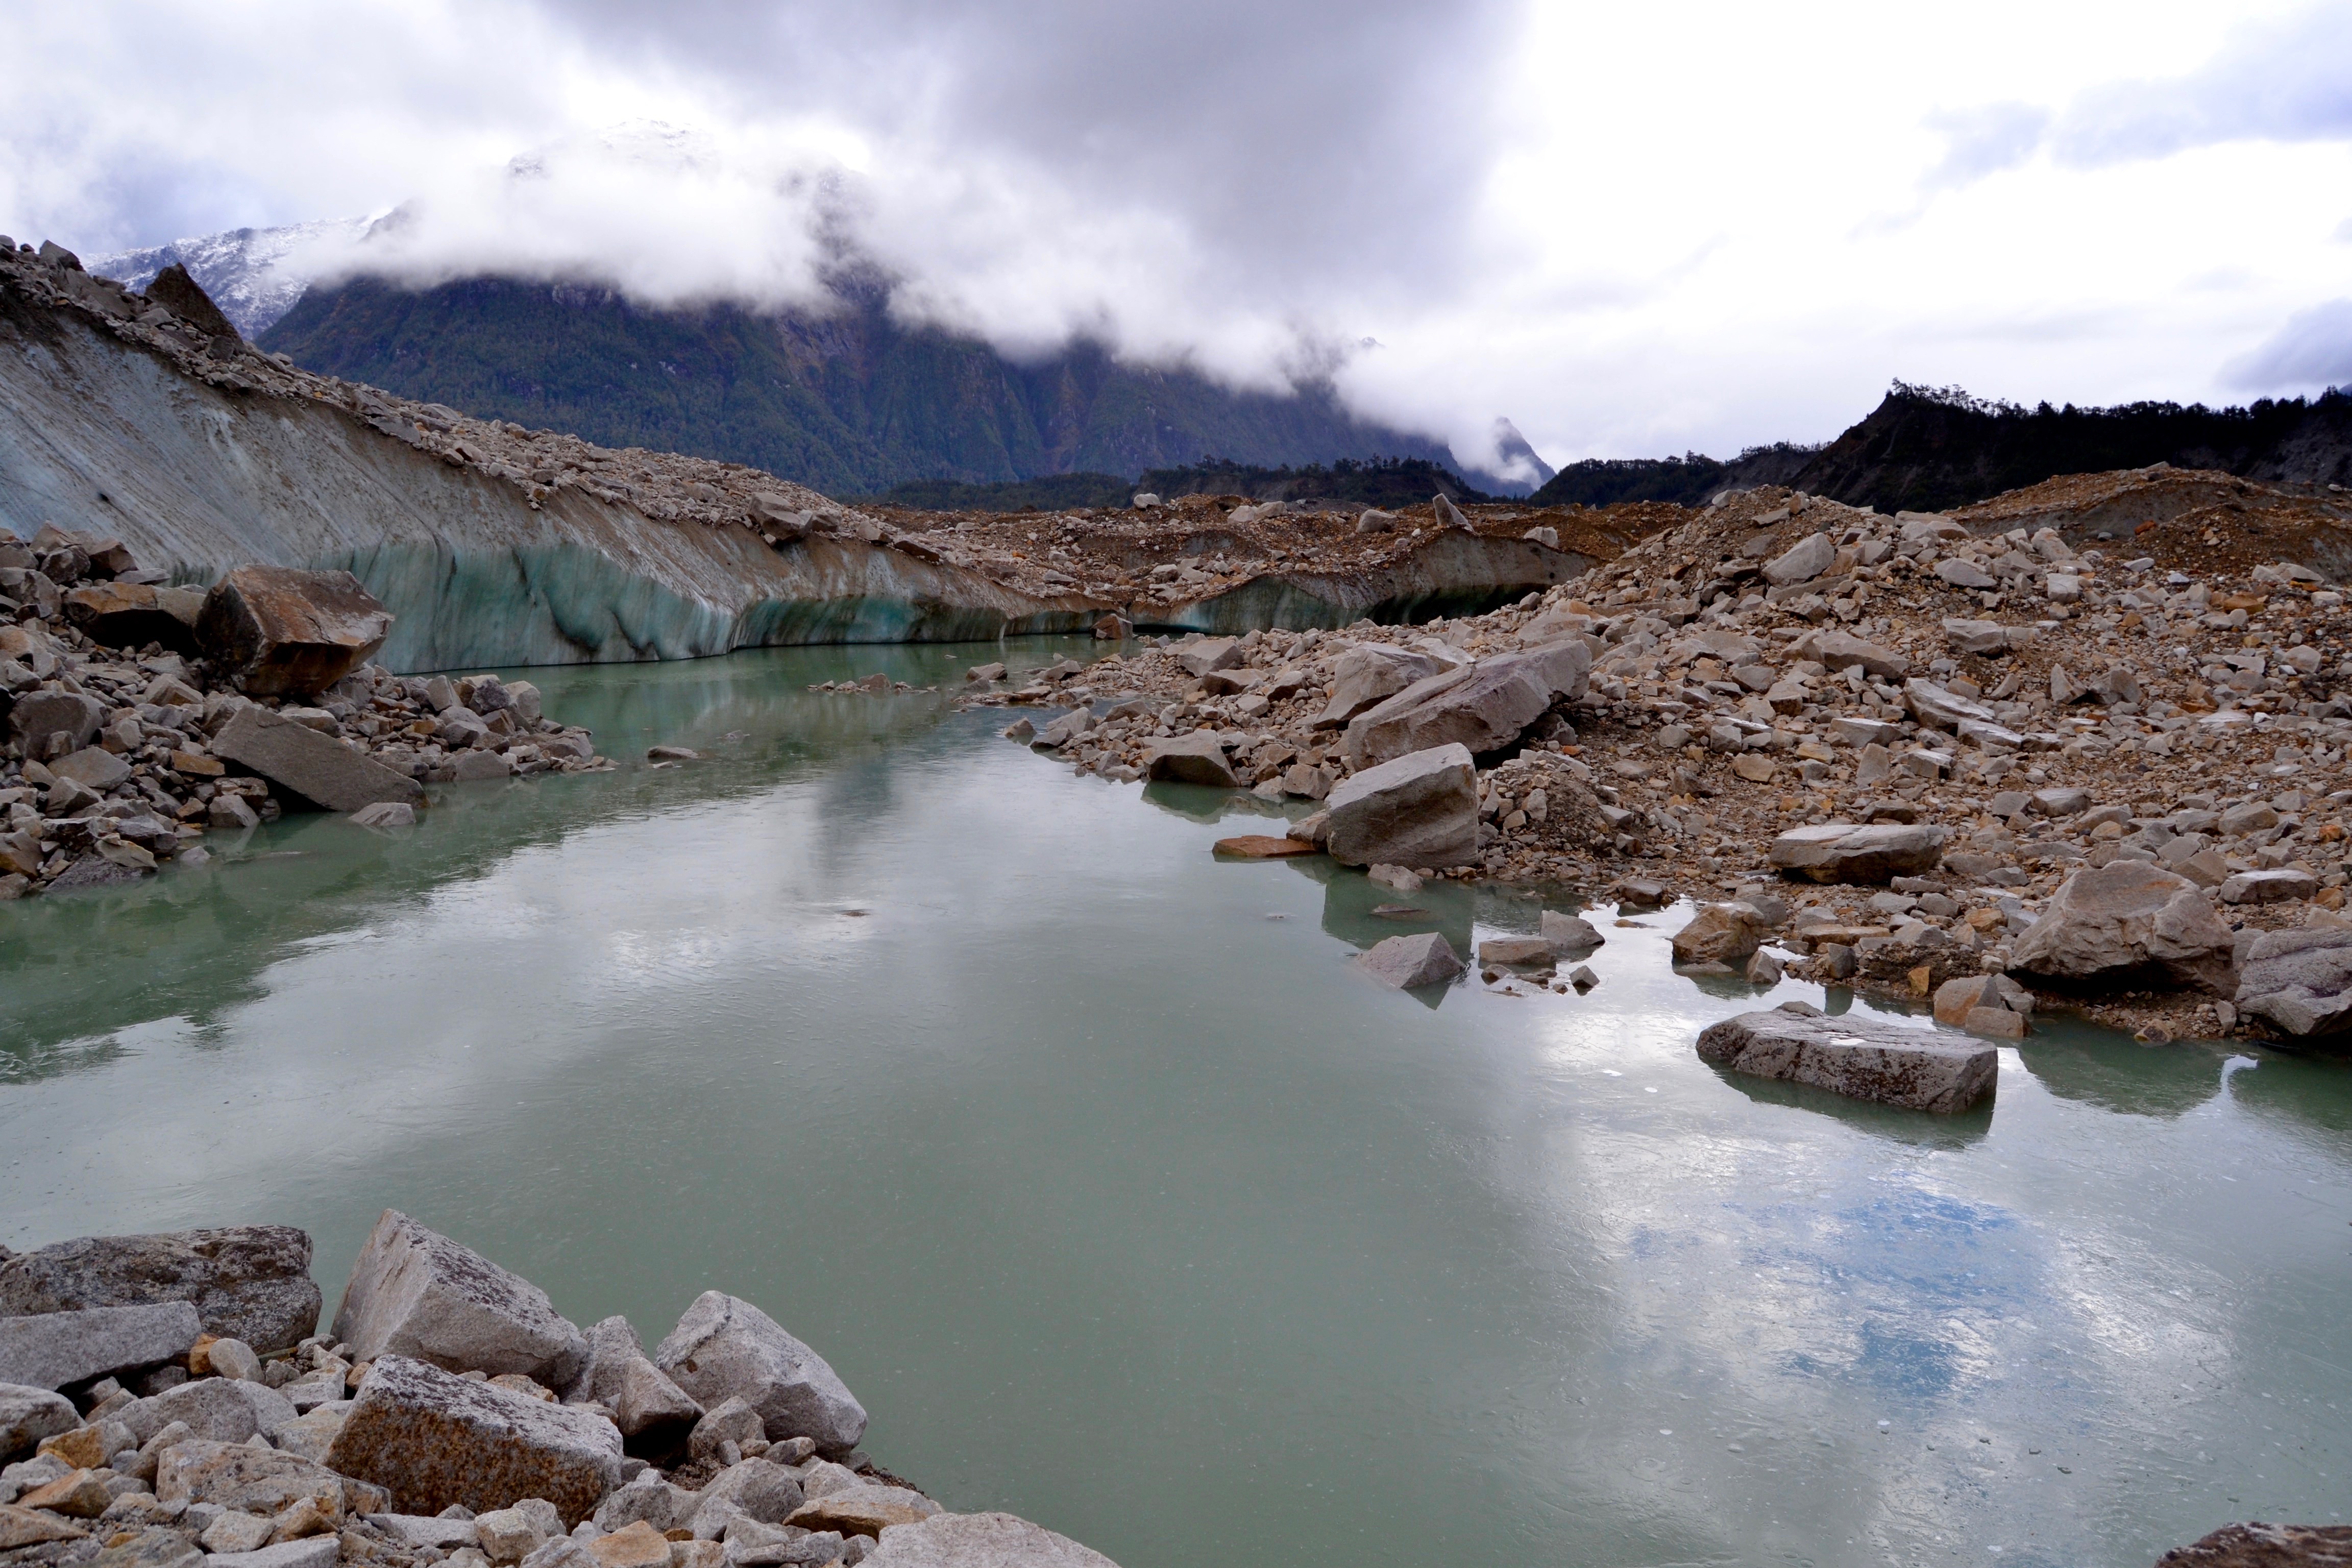 Last stretch before getting to the glacier: rocks, small lagoons and ice.